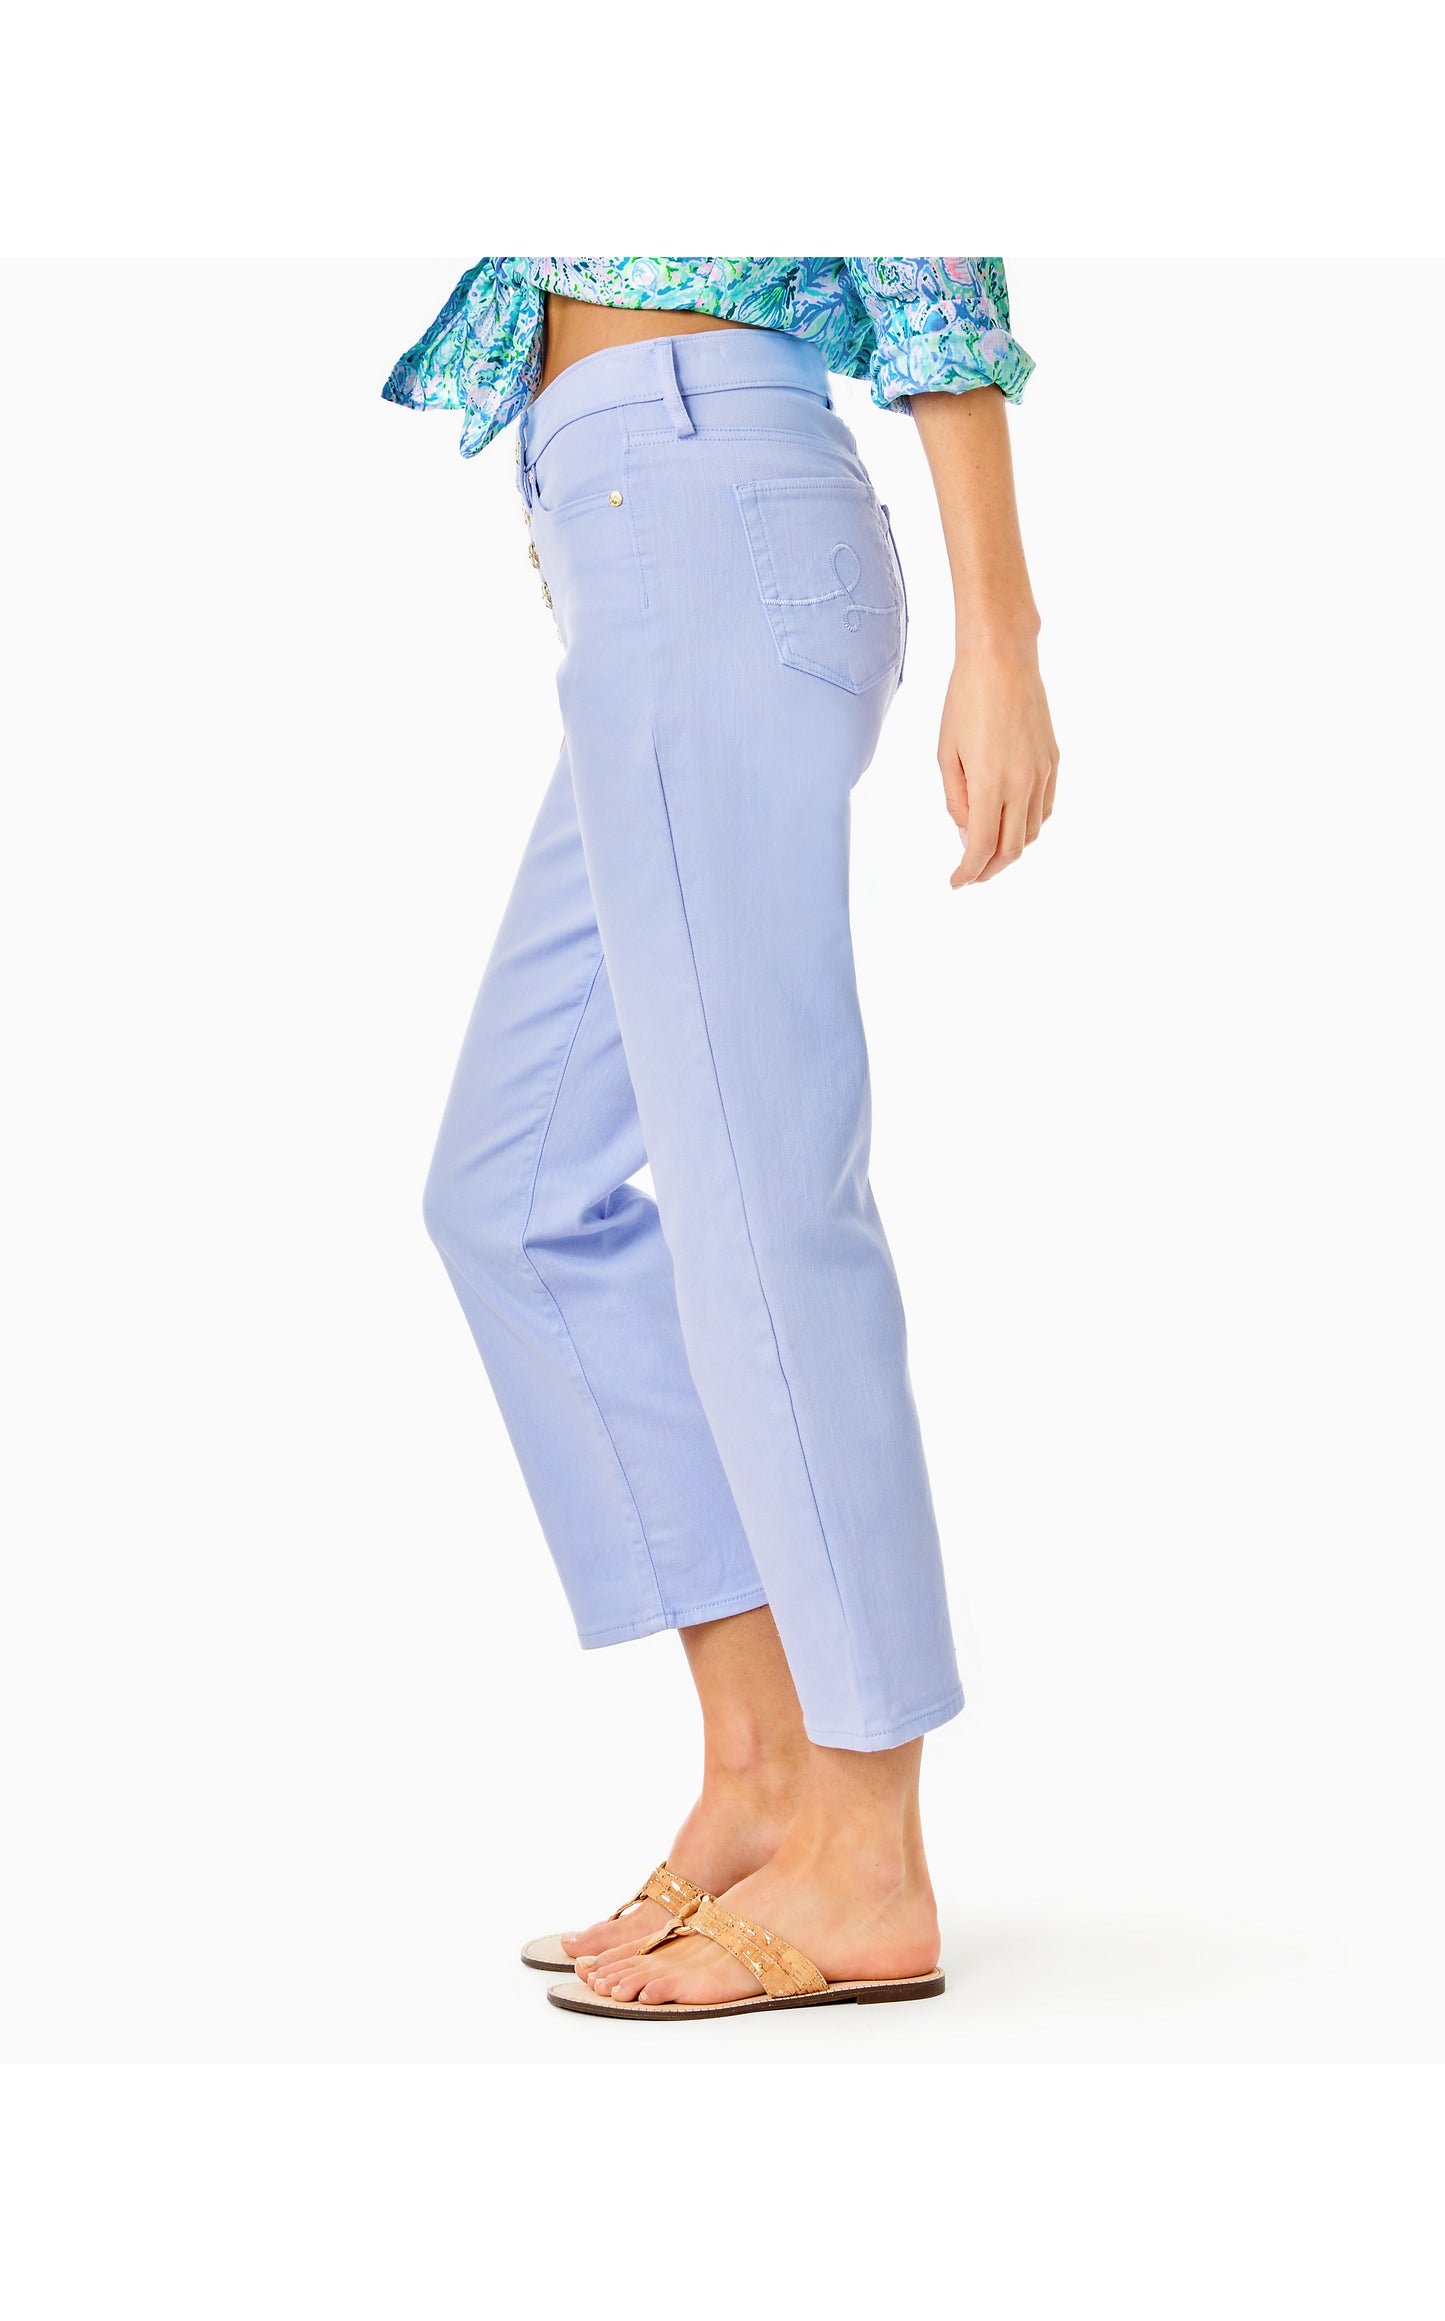 SOUTH OCEAN HIGH RISE STRETCH JEANS